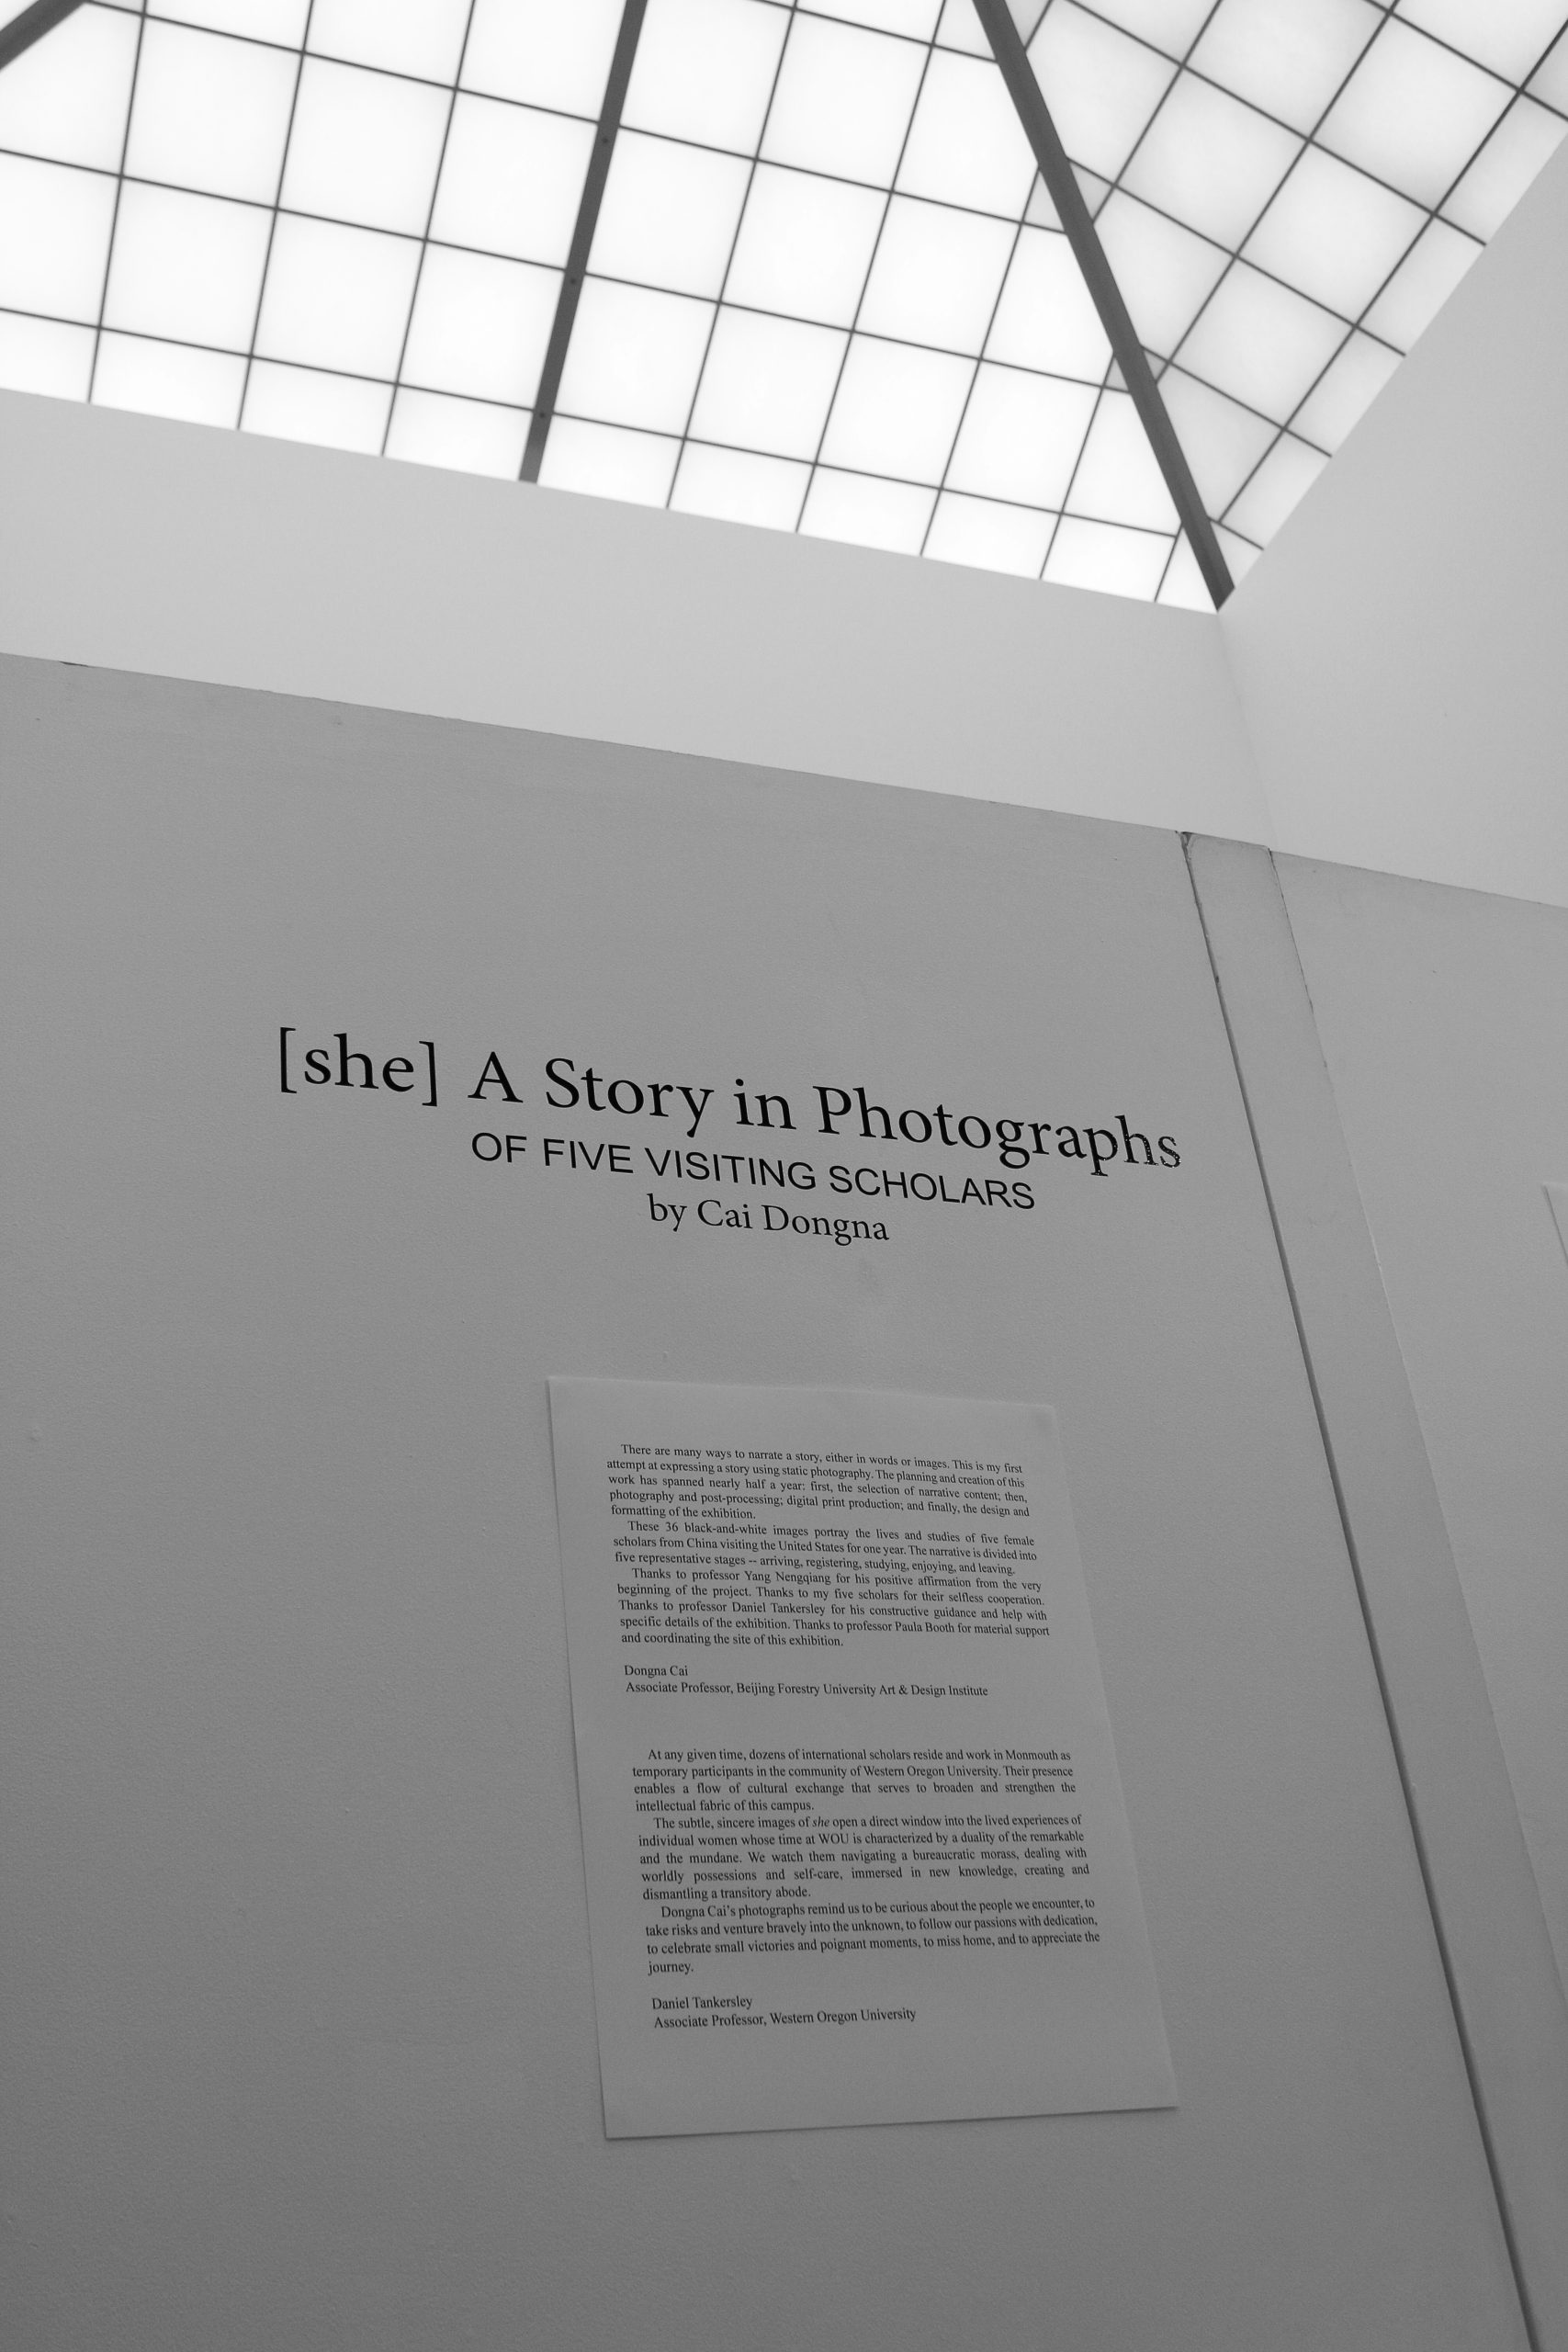 Hamersly Library showcases [she] A Story of Photographs